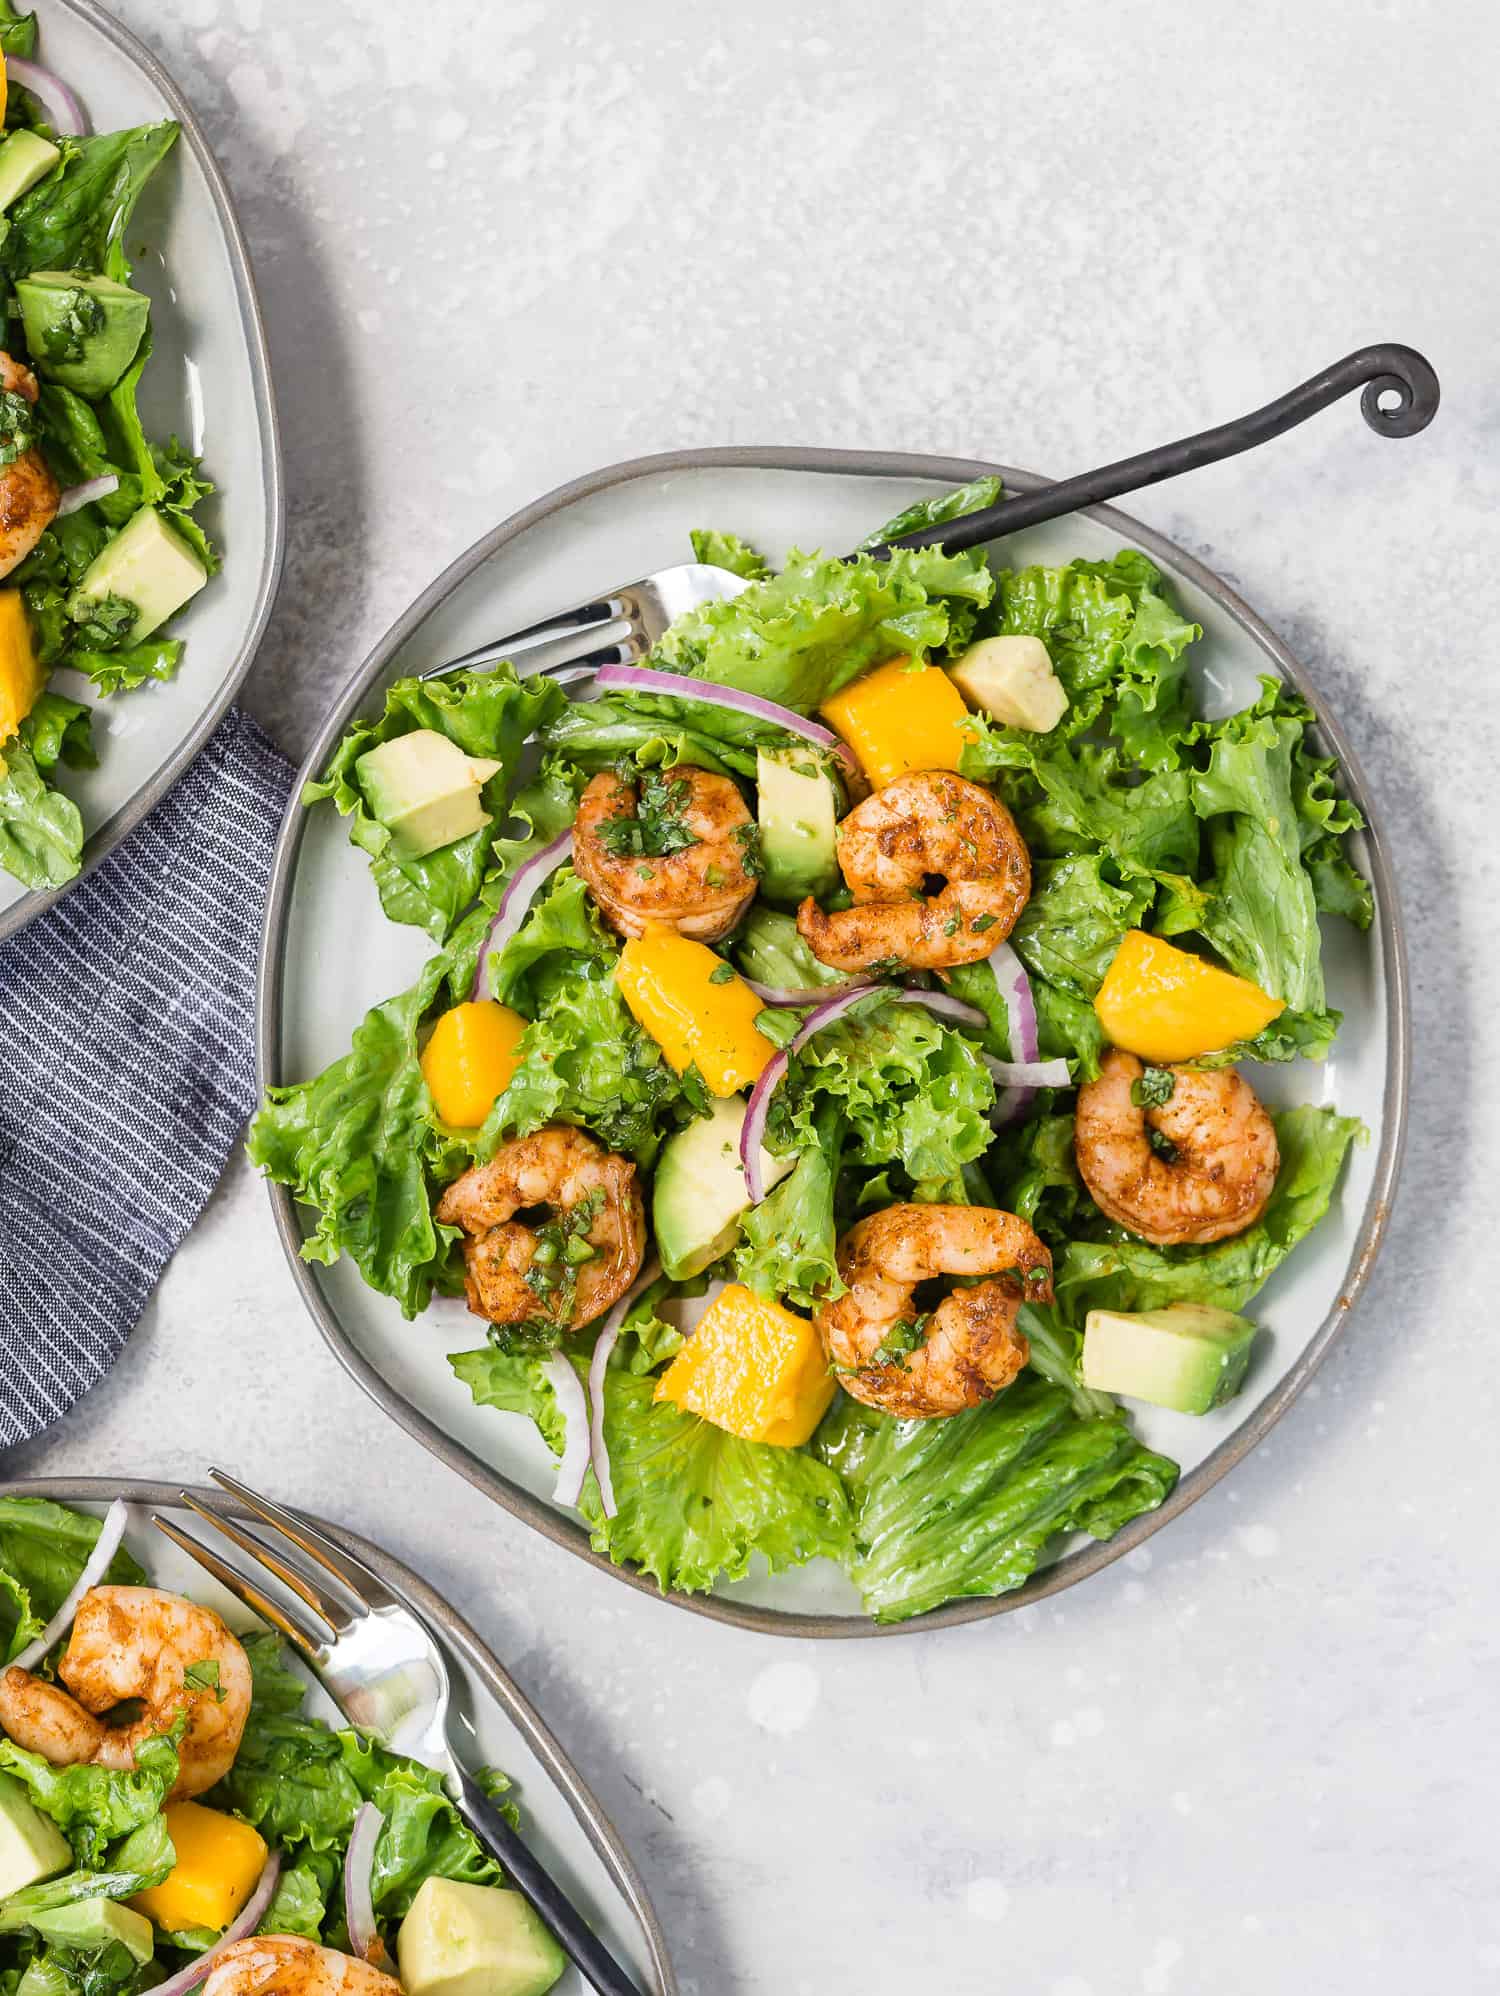 Overhead view of a bright green salad with mango, avocado, red onions, and shrimp.